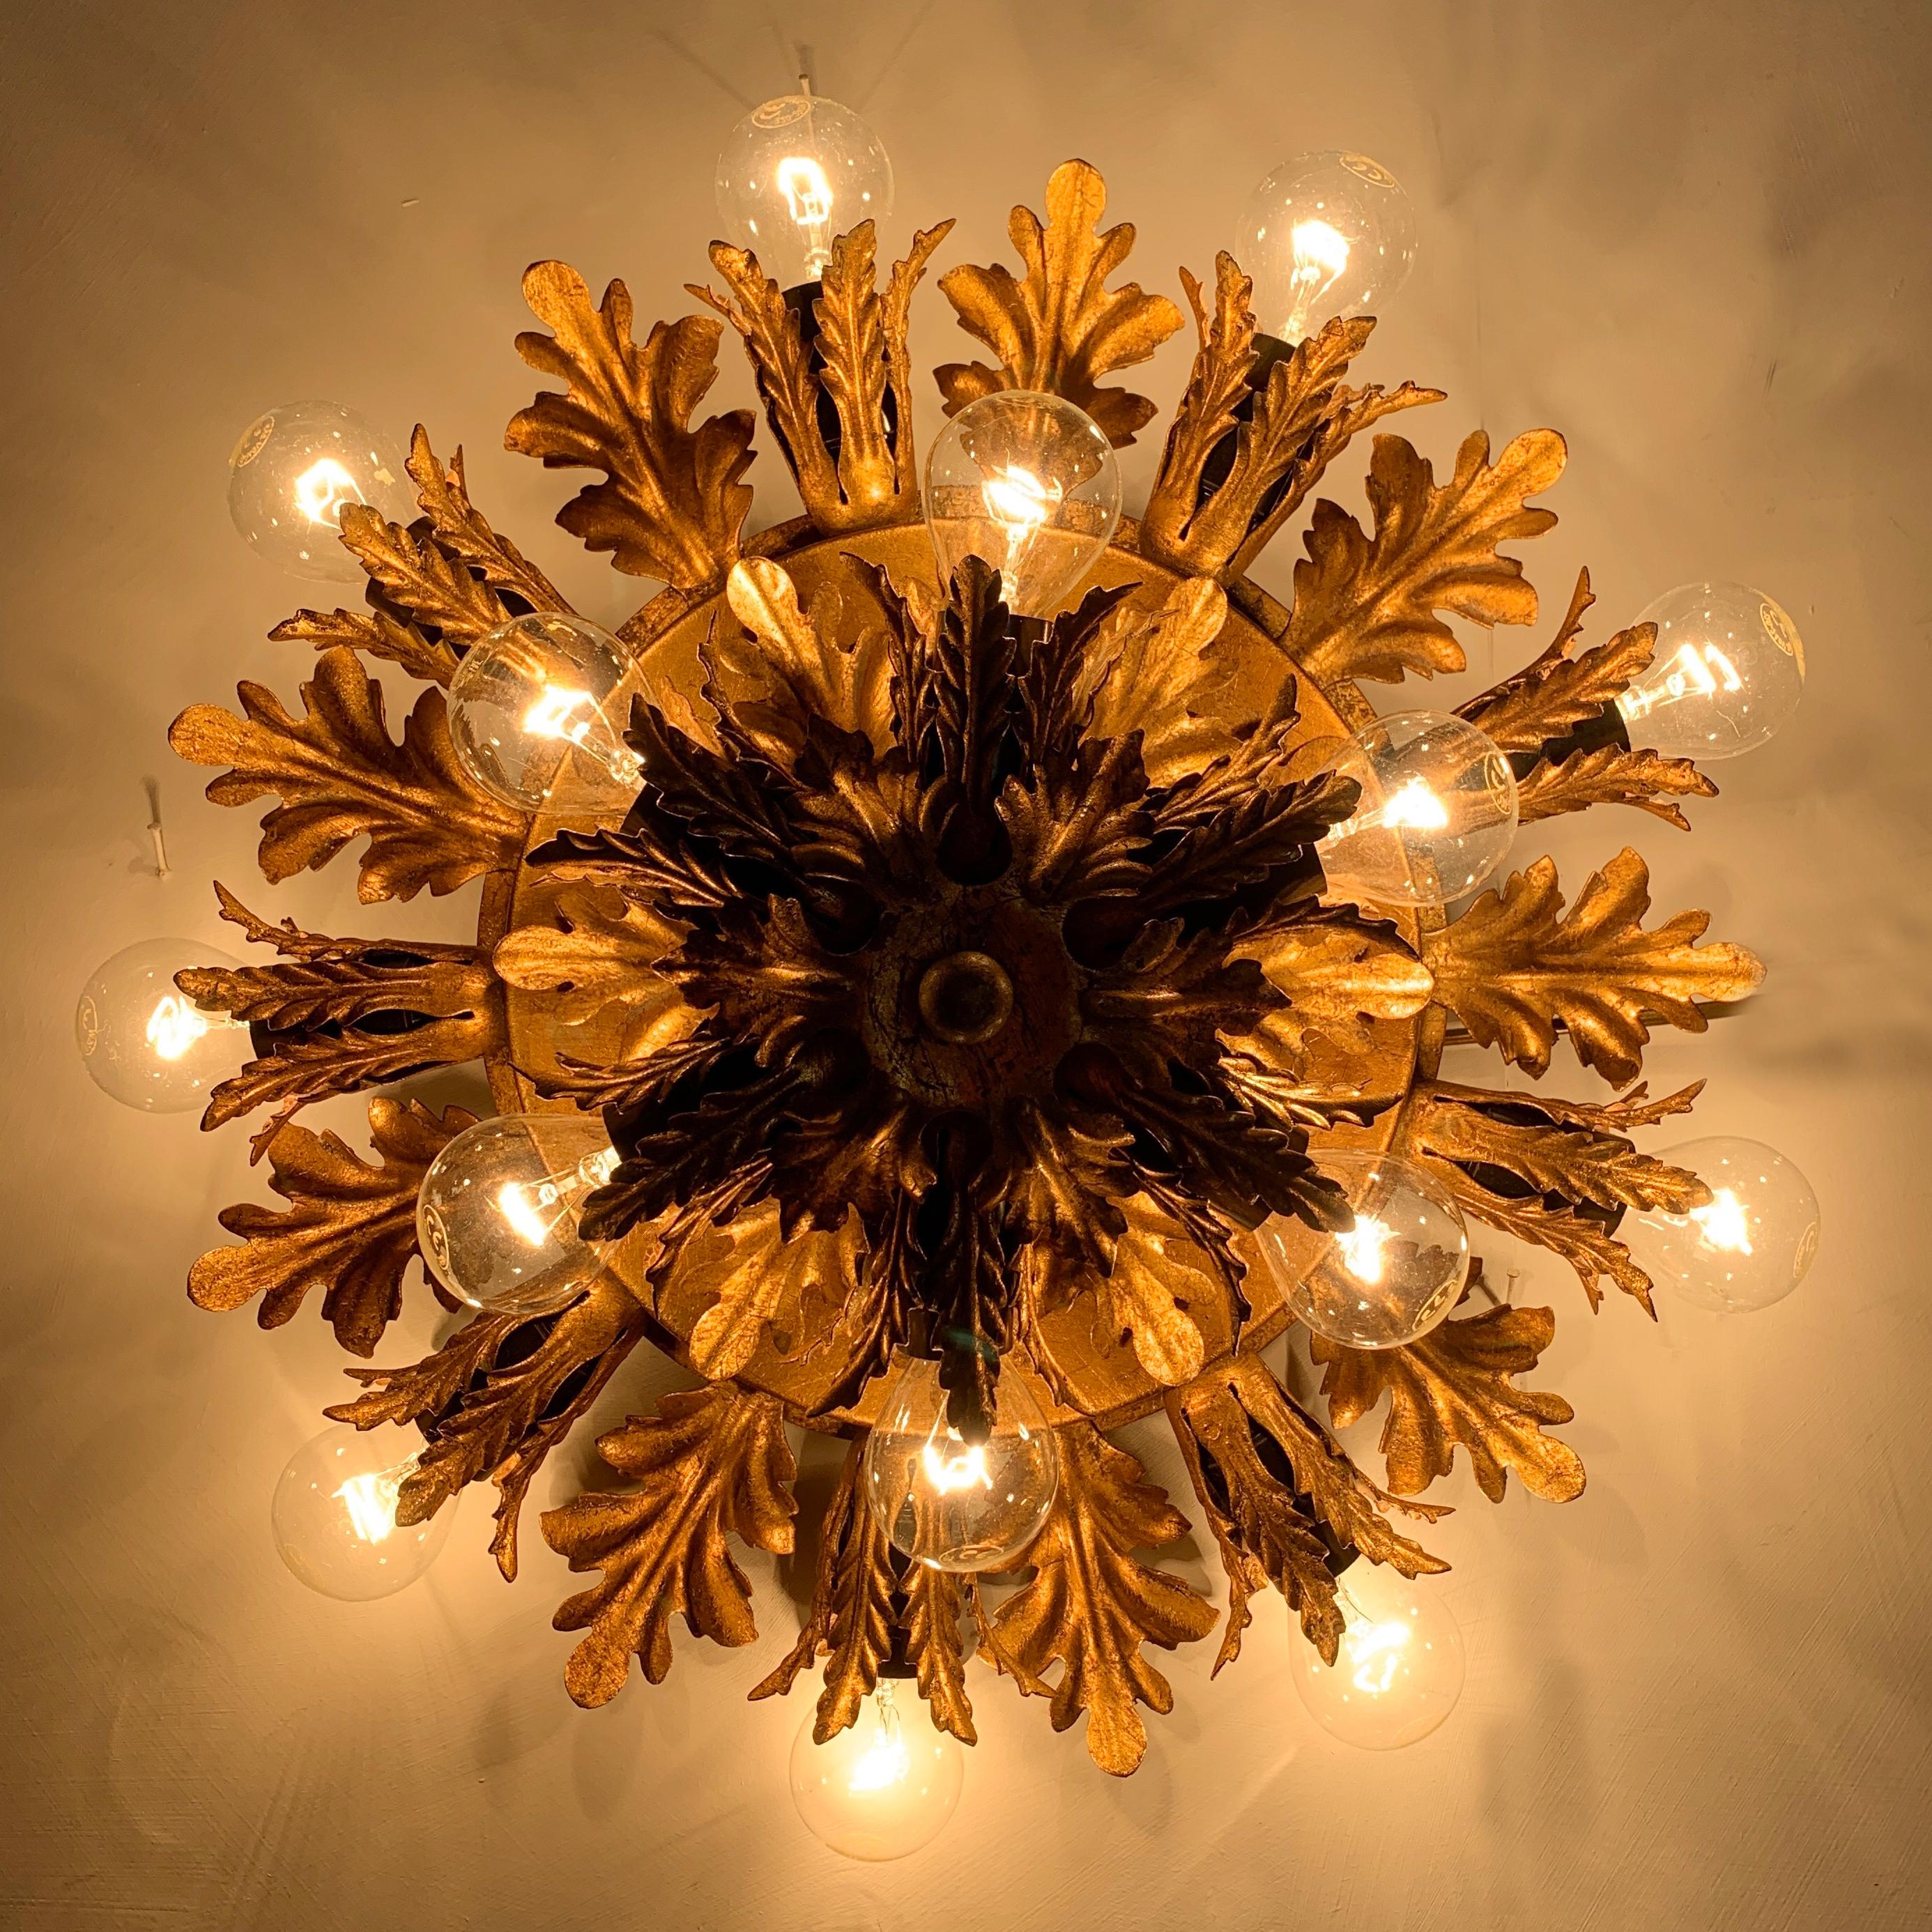 Italian florentine flushmount ceiling light
Banci Firenze, Italy, 1960s
Stunning gold acanthus leaf design
Gold leaf finish
42cm width 13cm depth (protrusion from ceiling)
Double layer of bulbs
9 bulb holders in the outer layer, 6 in the top